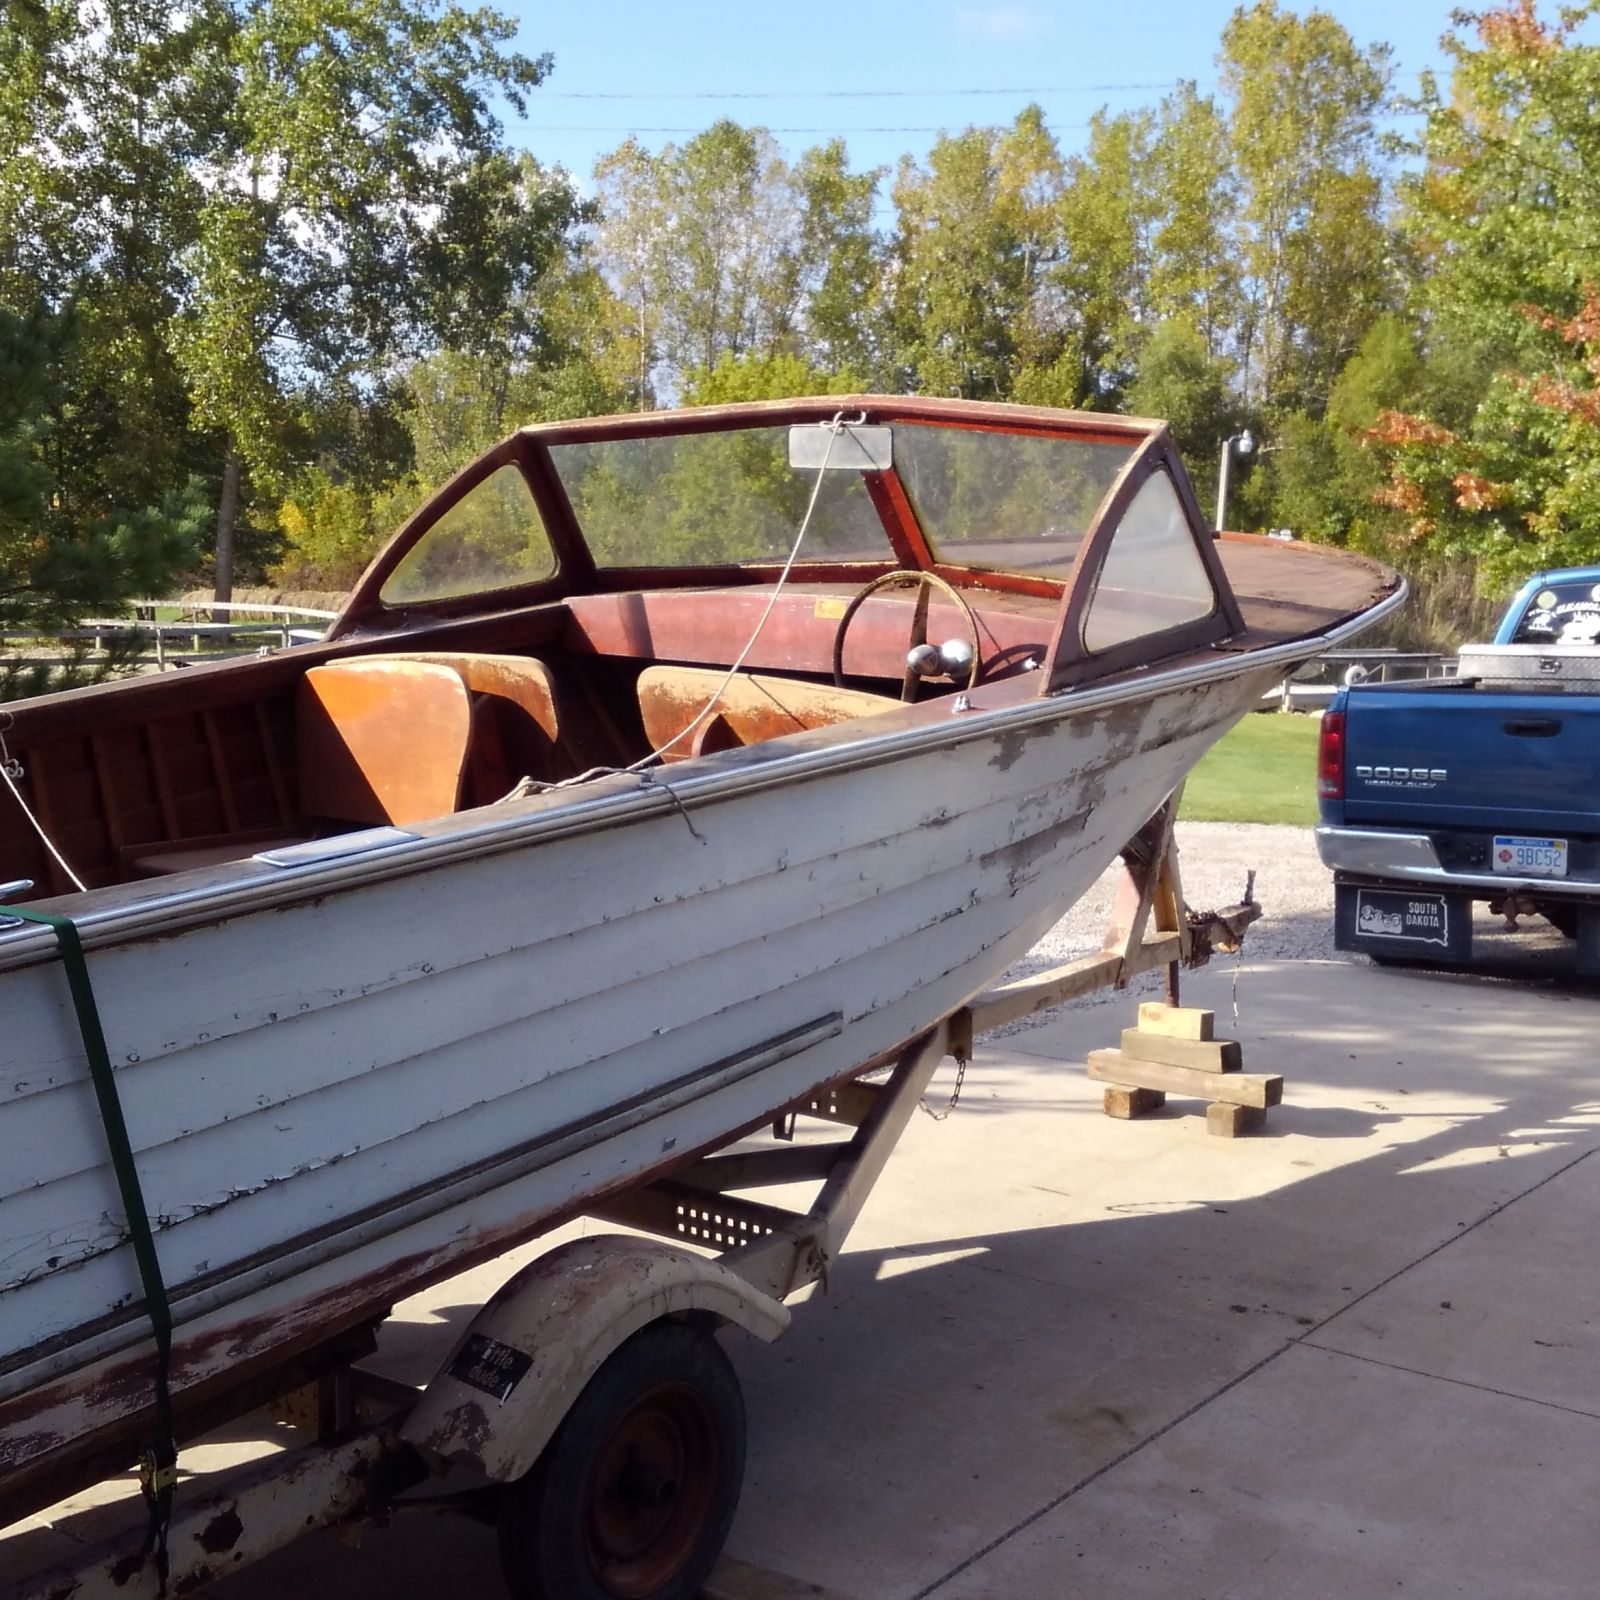 grady white - ladyben classic wooden boats for sale